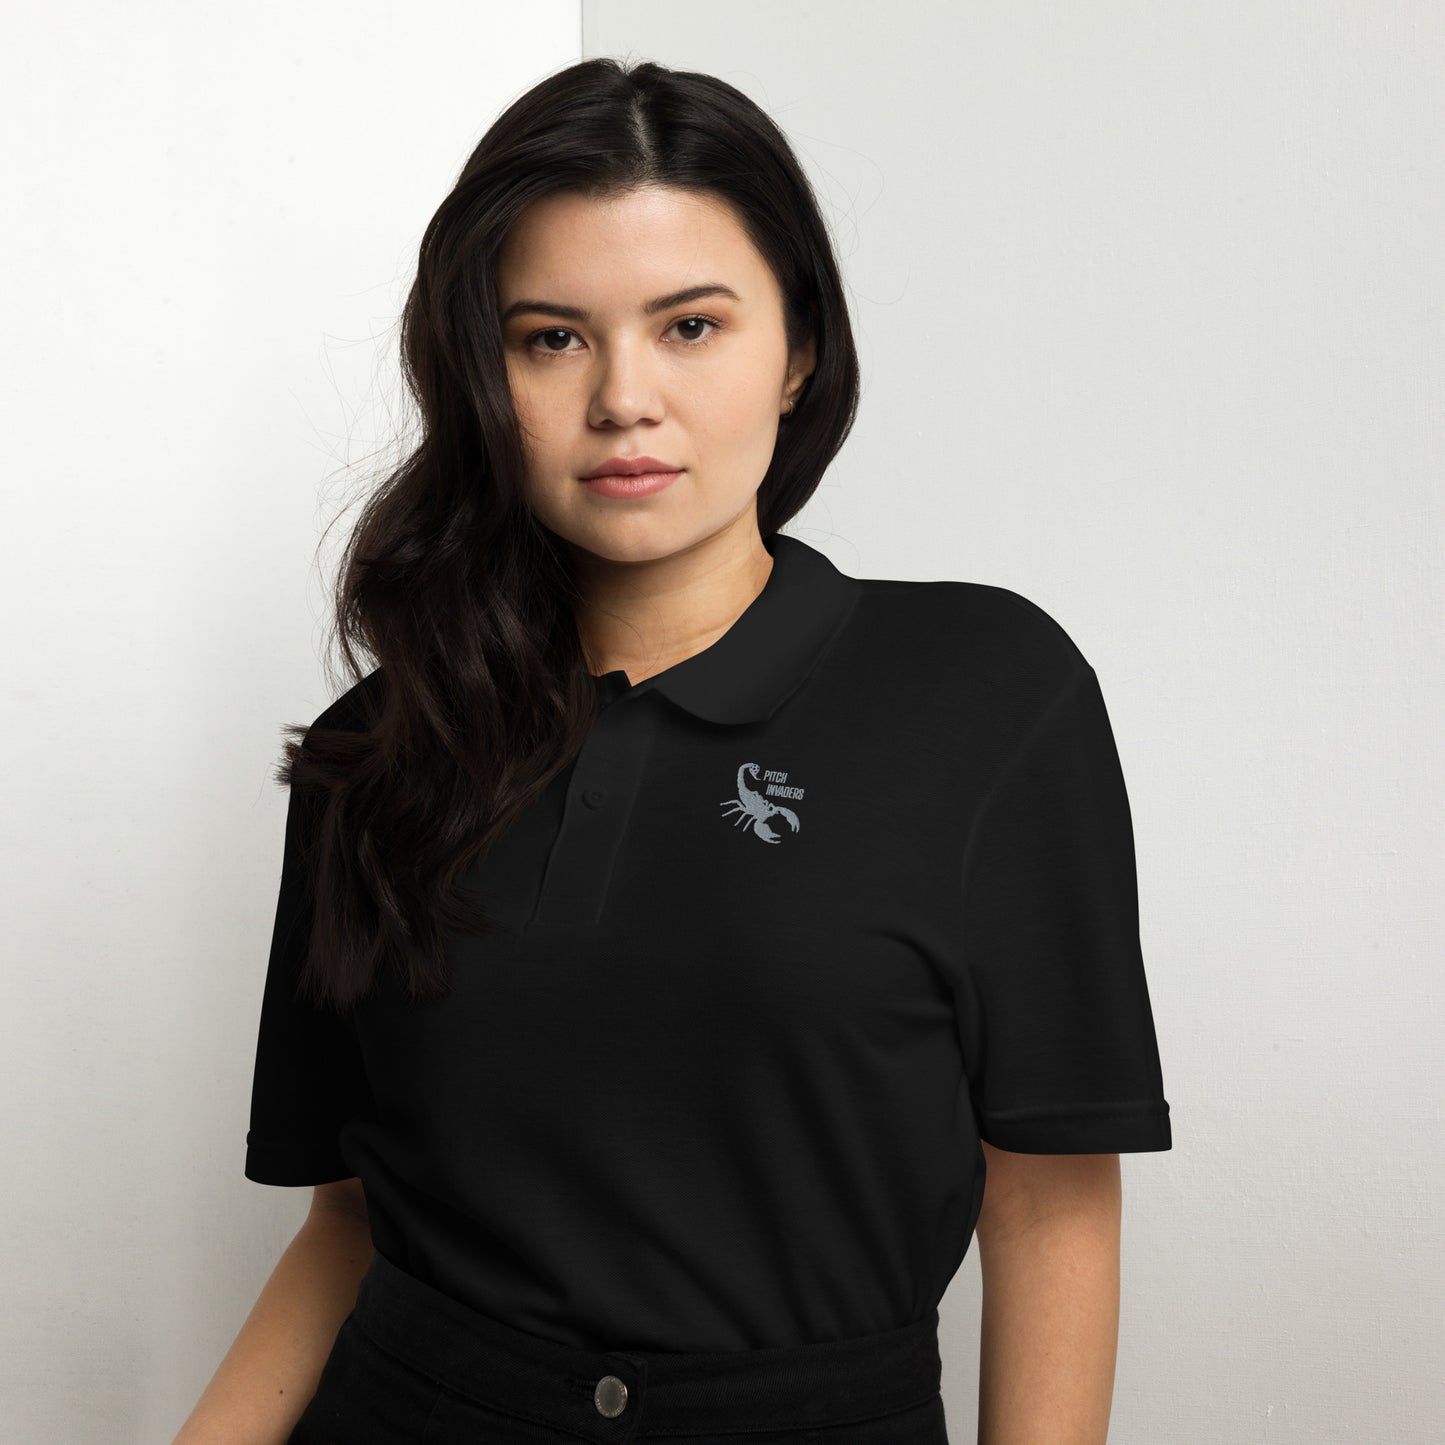 Black or Navy Casual Polo Shirt (Unisex)